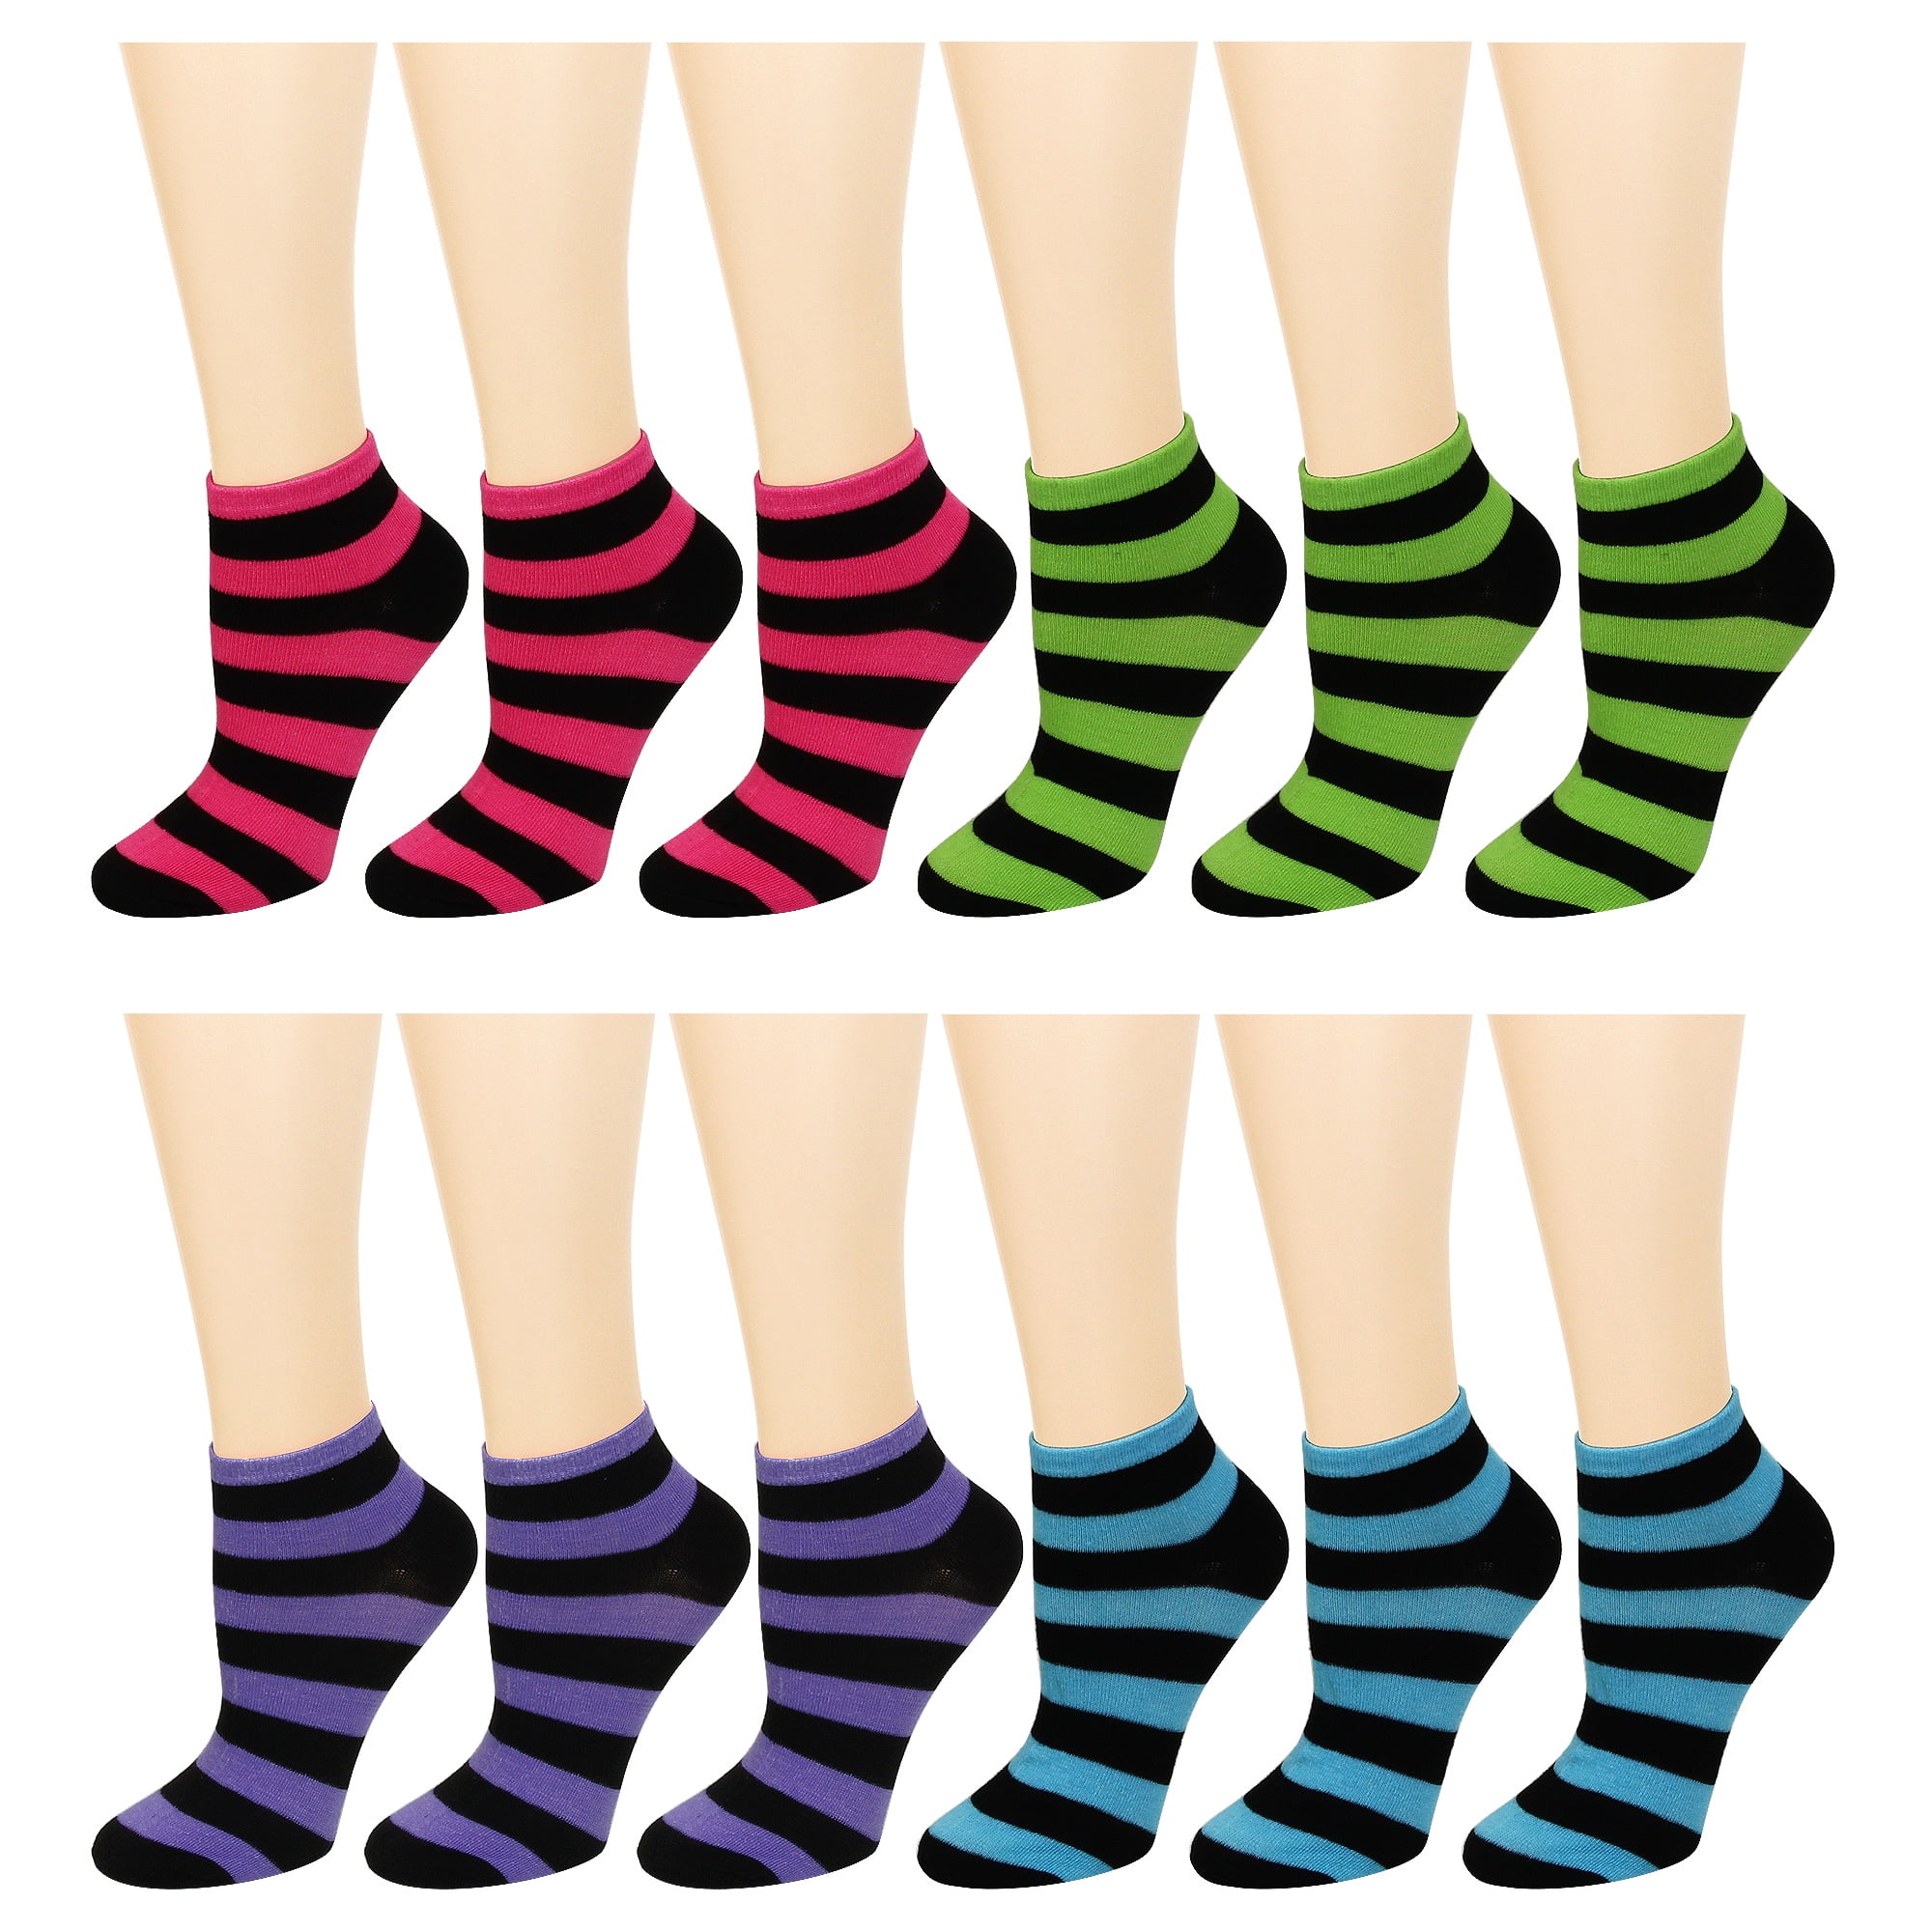 Falari - 12 Pairs Assorted Colors Women's Ankle Socks Size 9-11 Striped ...